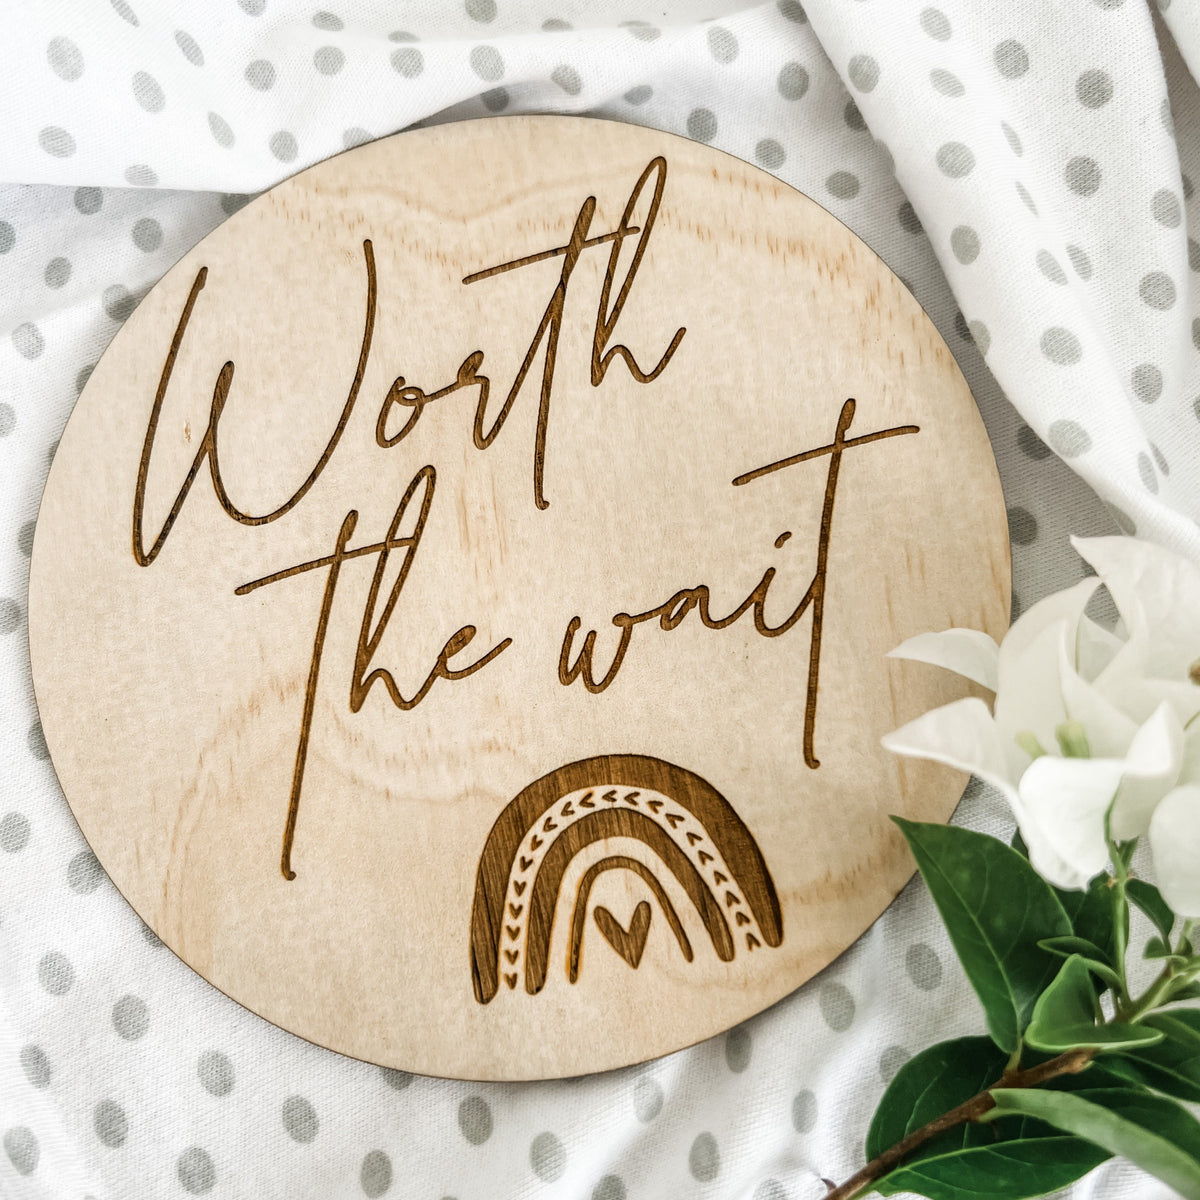 Worth the Wait - The Confetti Gift Co